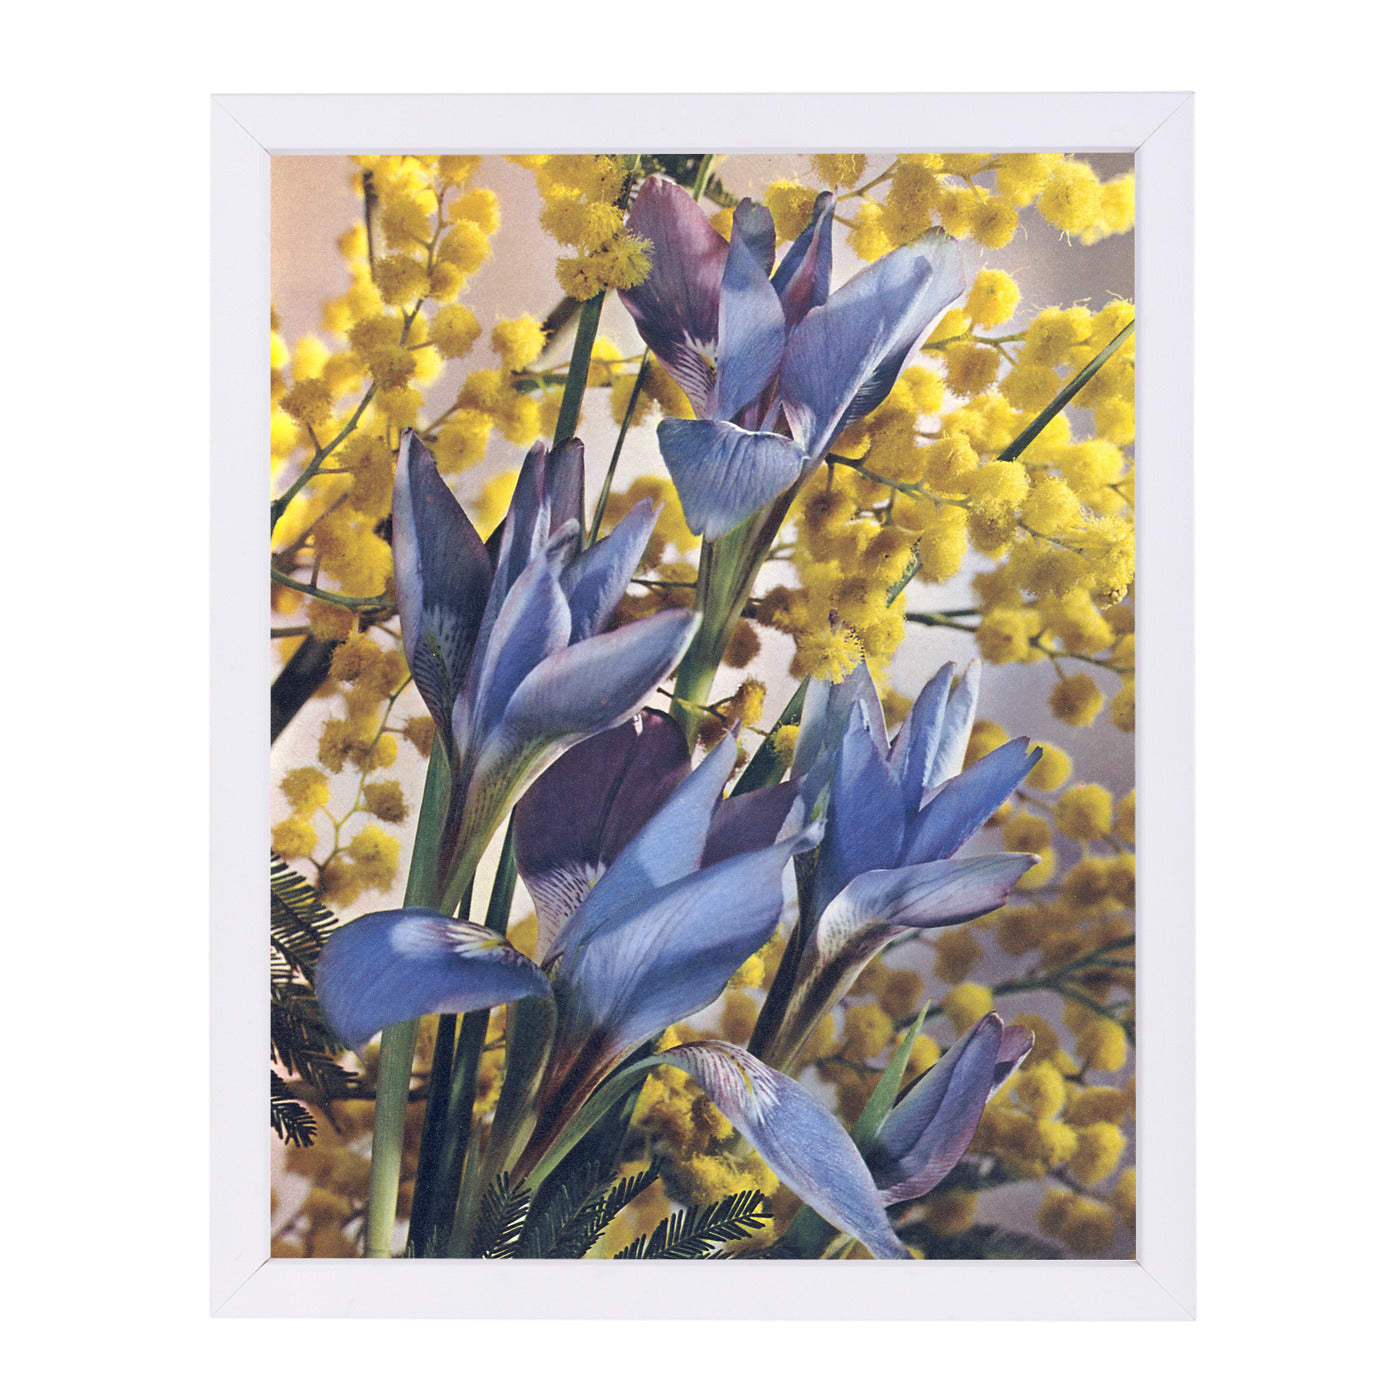 Wild Irises by Found Image Press Framed Print - Americanflat